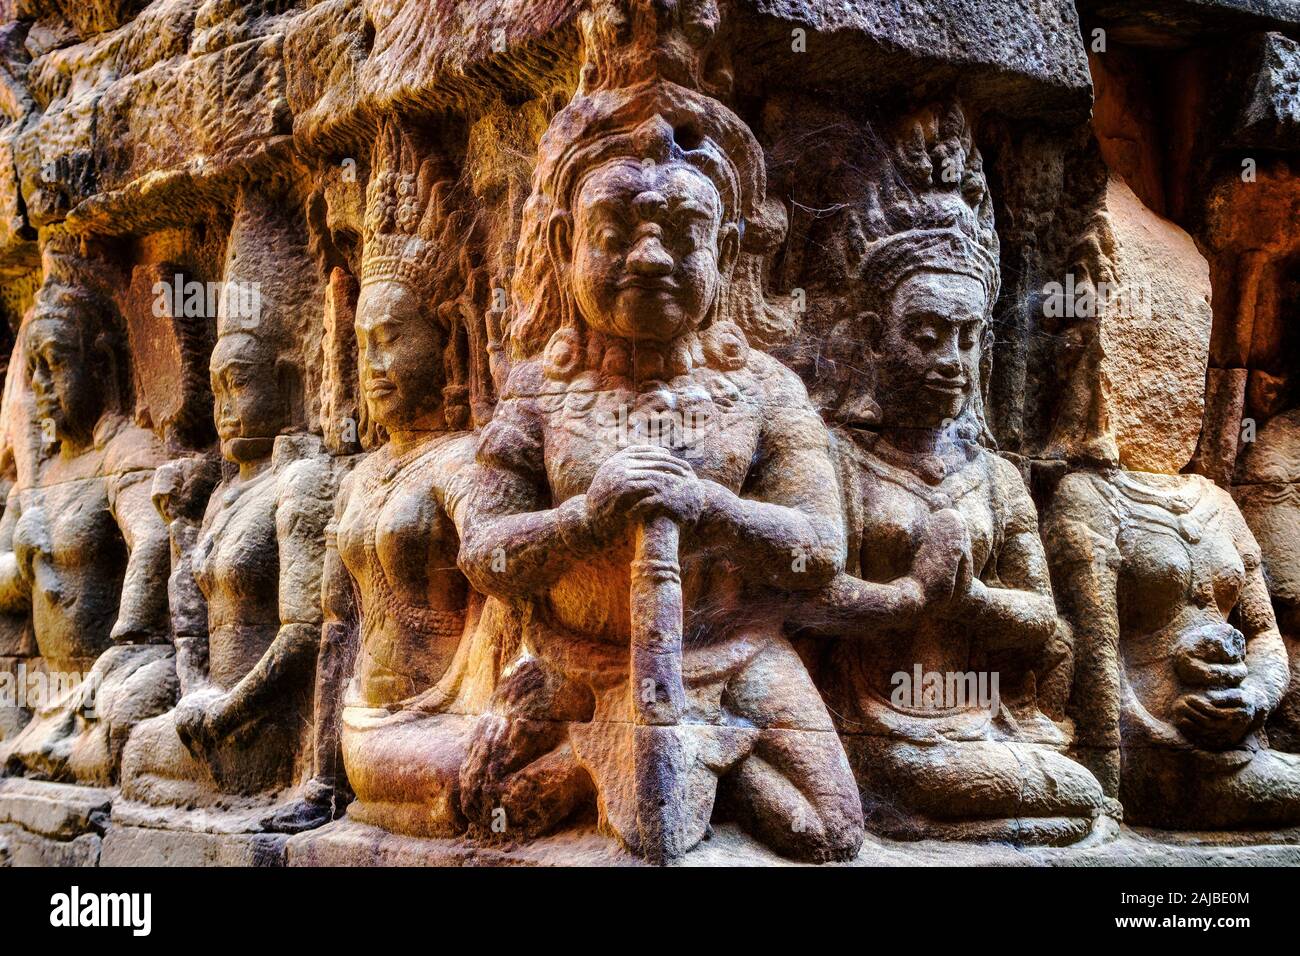 Terrace of the Leper King at Angkor, Siem Reap, Cambodia. Close up detail of ancient bas relief carvings on the wall. Stock Photo